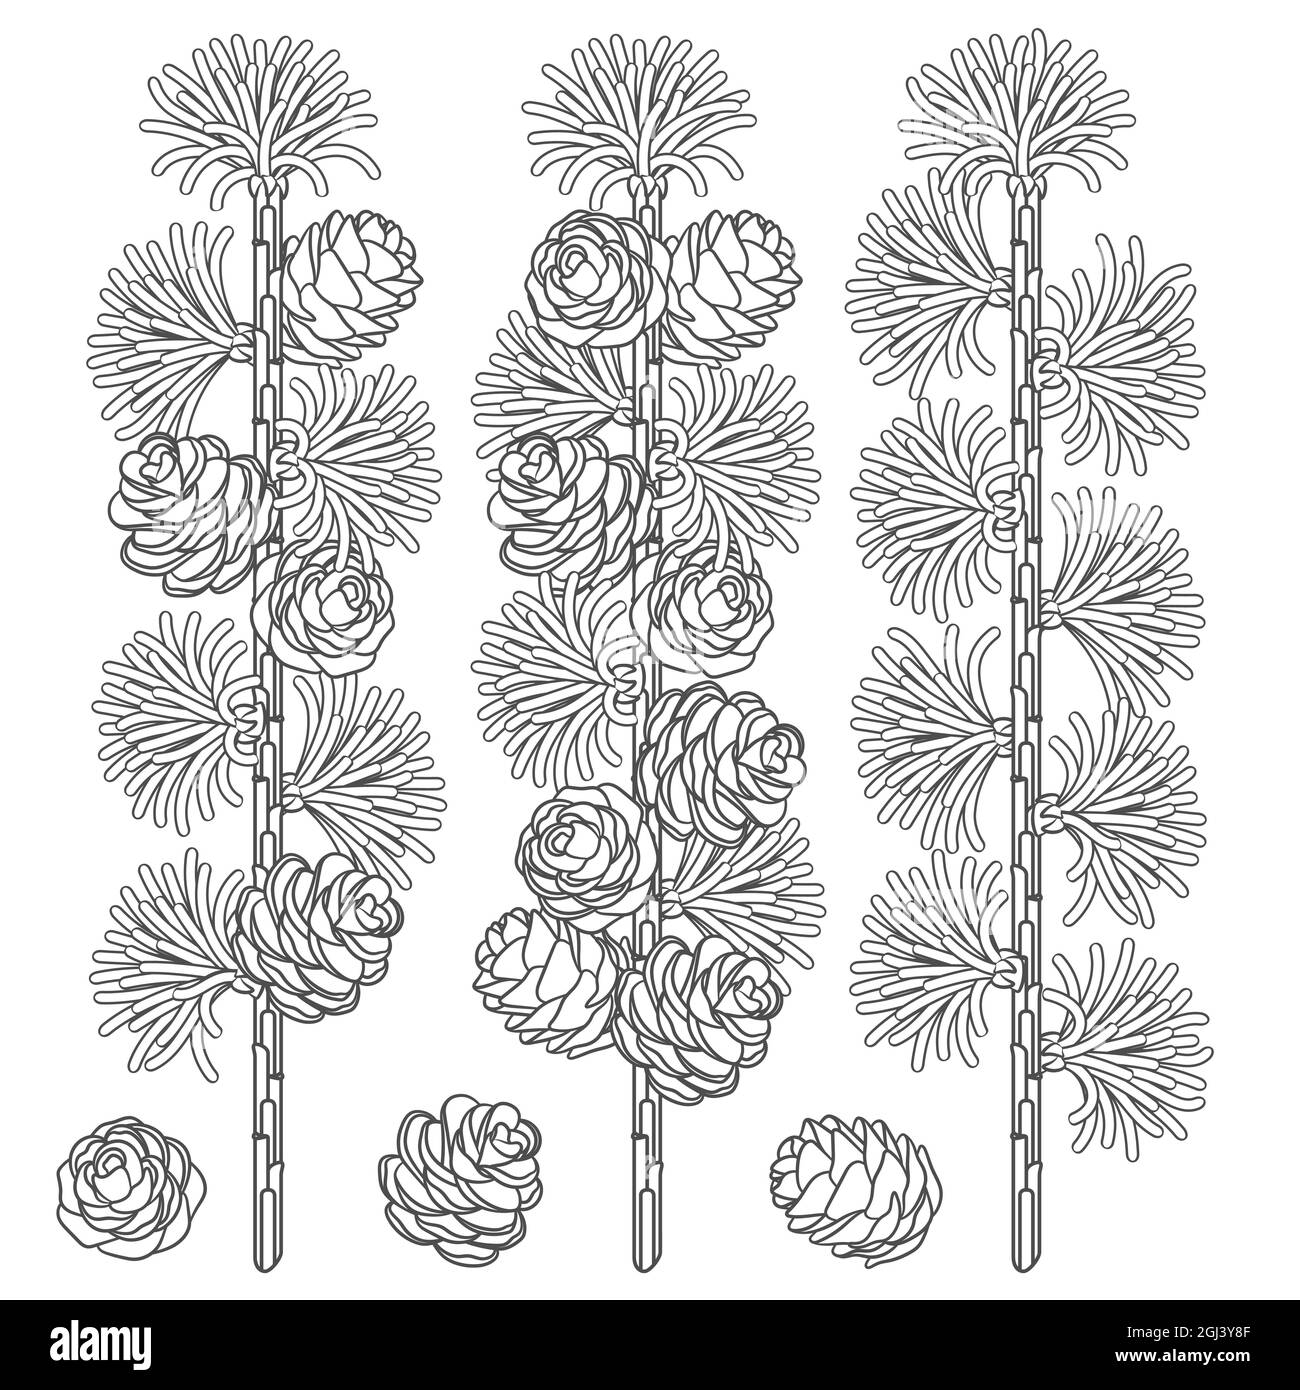 Set of black and white images of larch branches and cones. Isolated vector objects on white background. Stock Vector